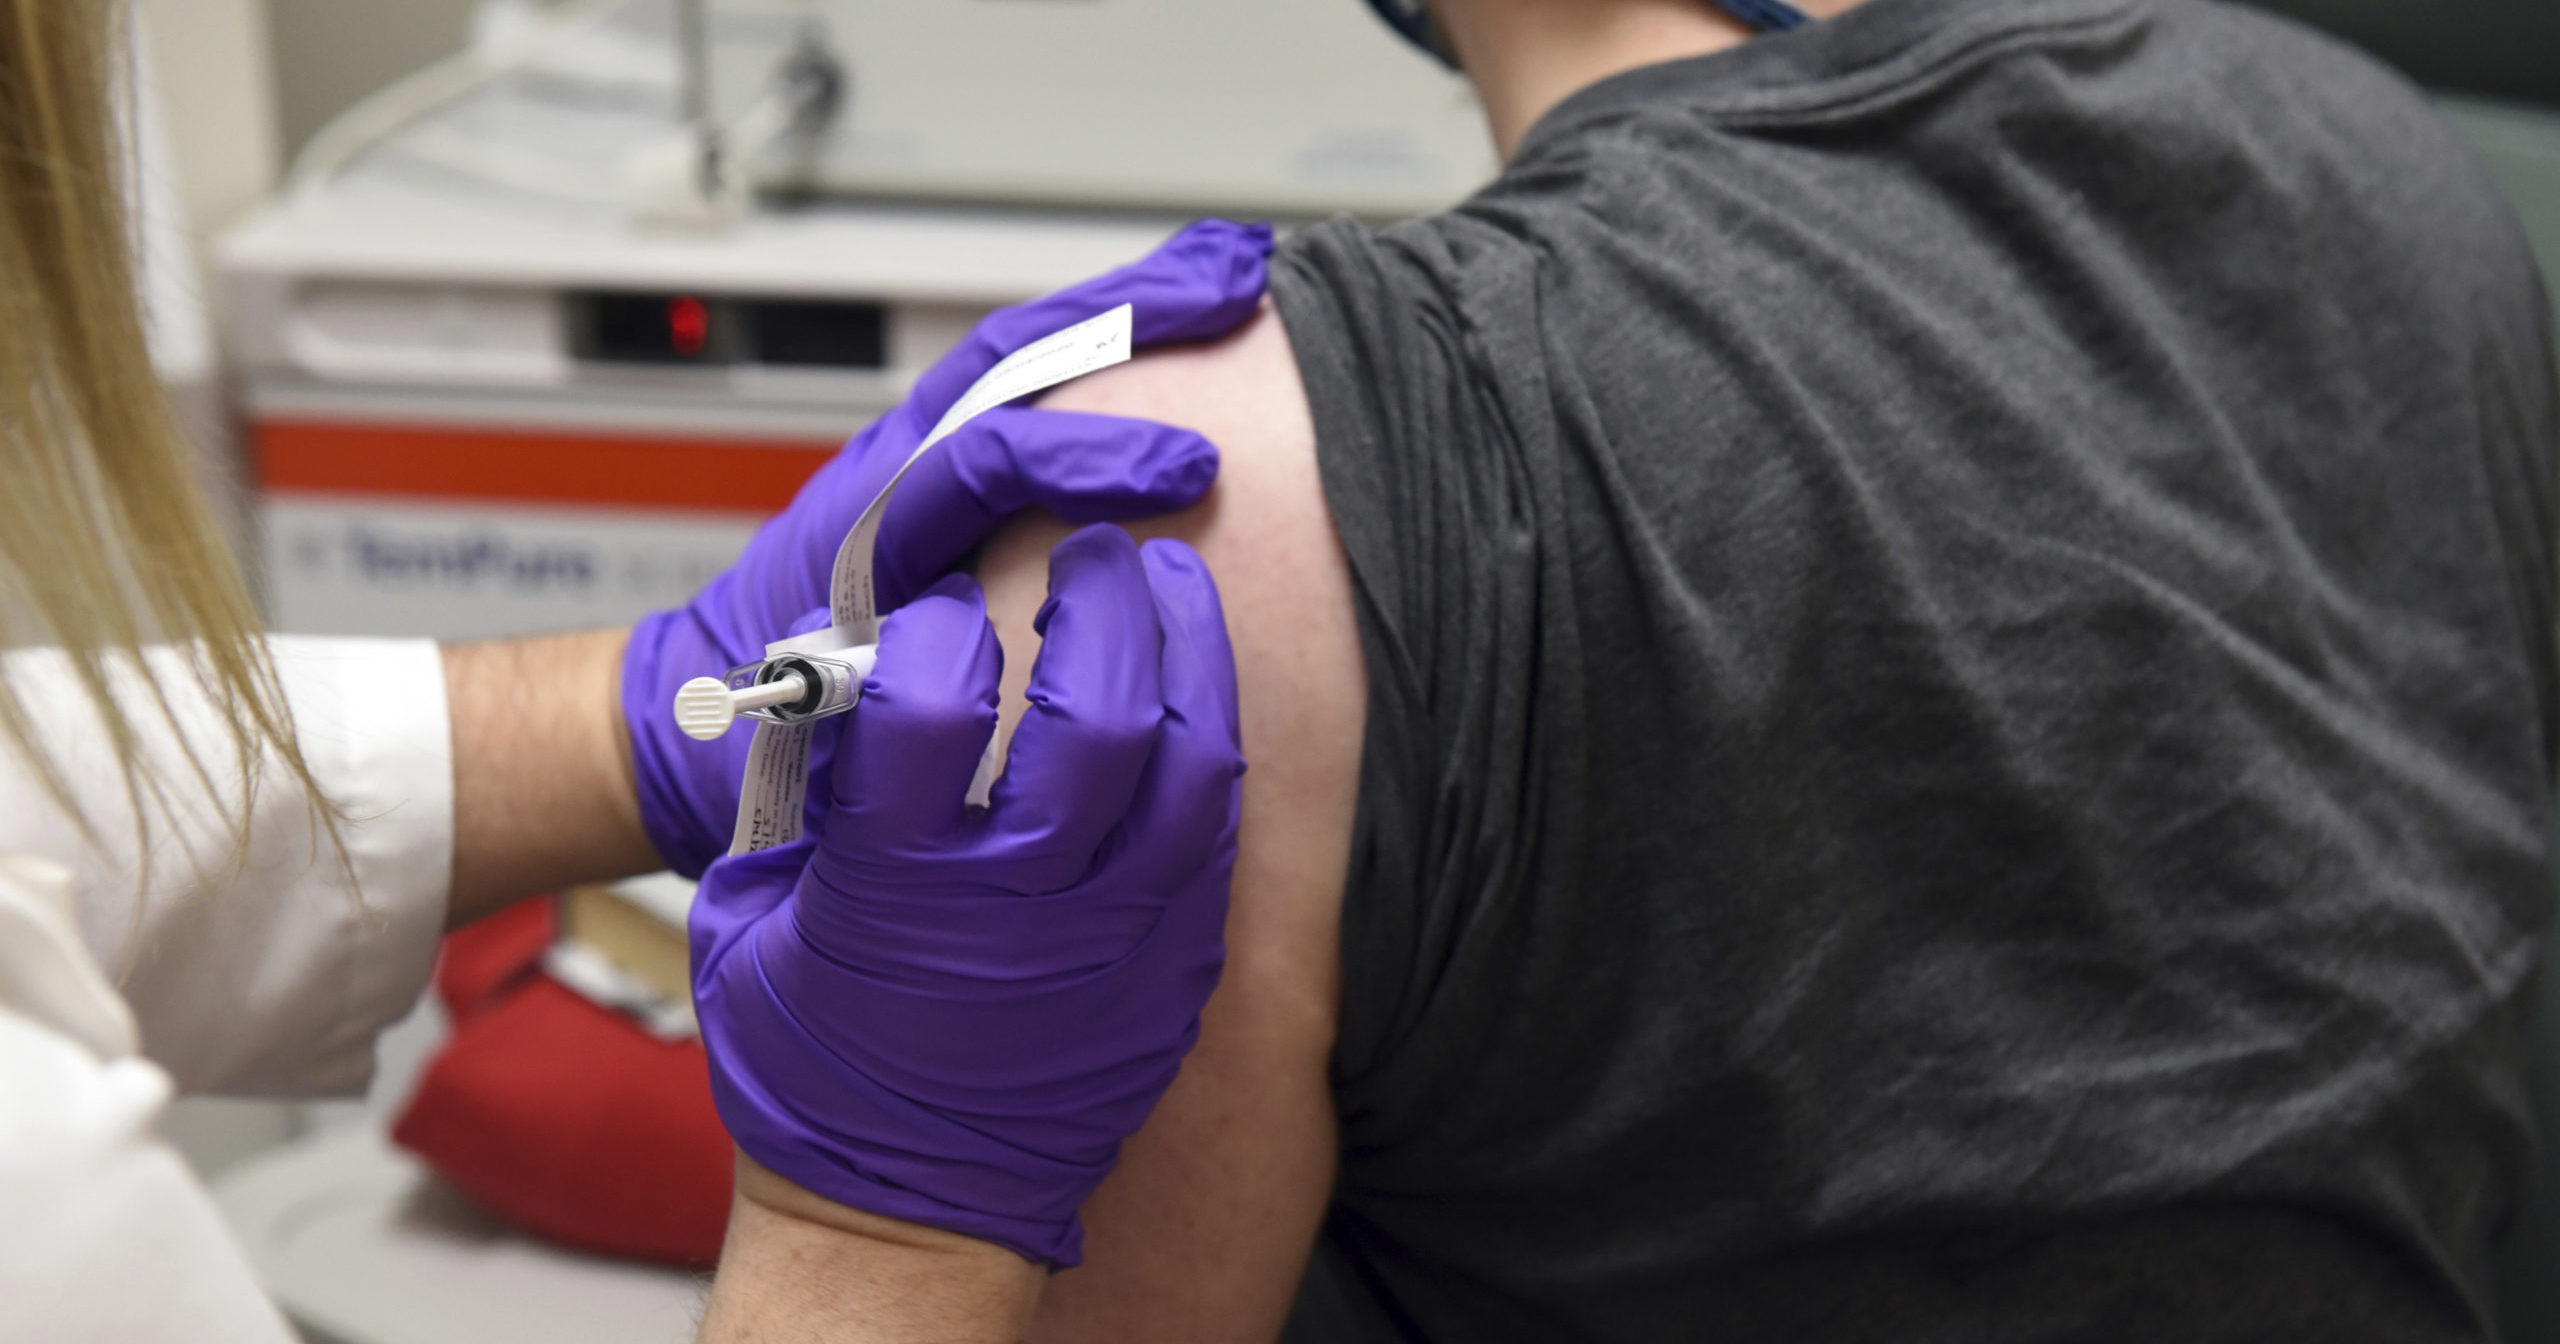 This May 4, 2020, file photo shows a patient receiving Pfizer's COVID-19 vaccine in a clinical trial at the University of Maryland School of Medicine in Baltimore.